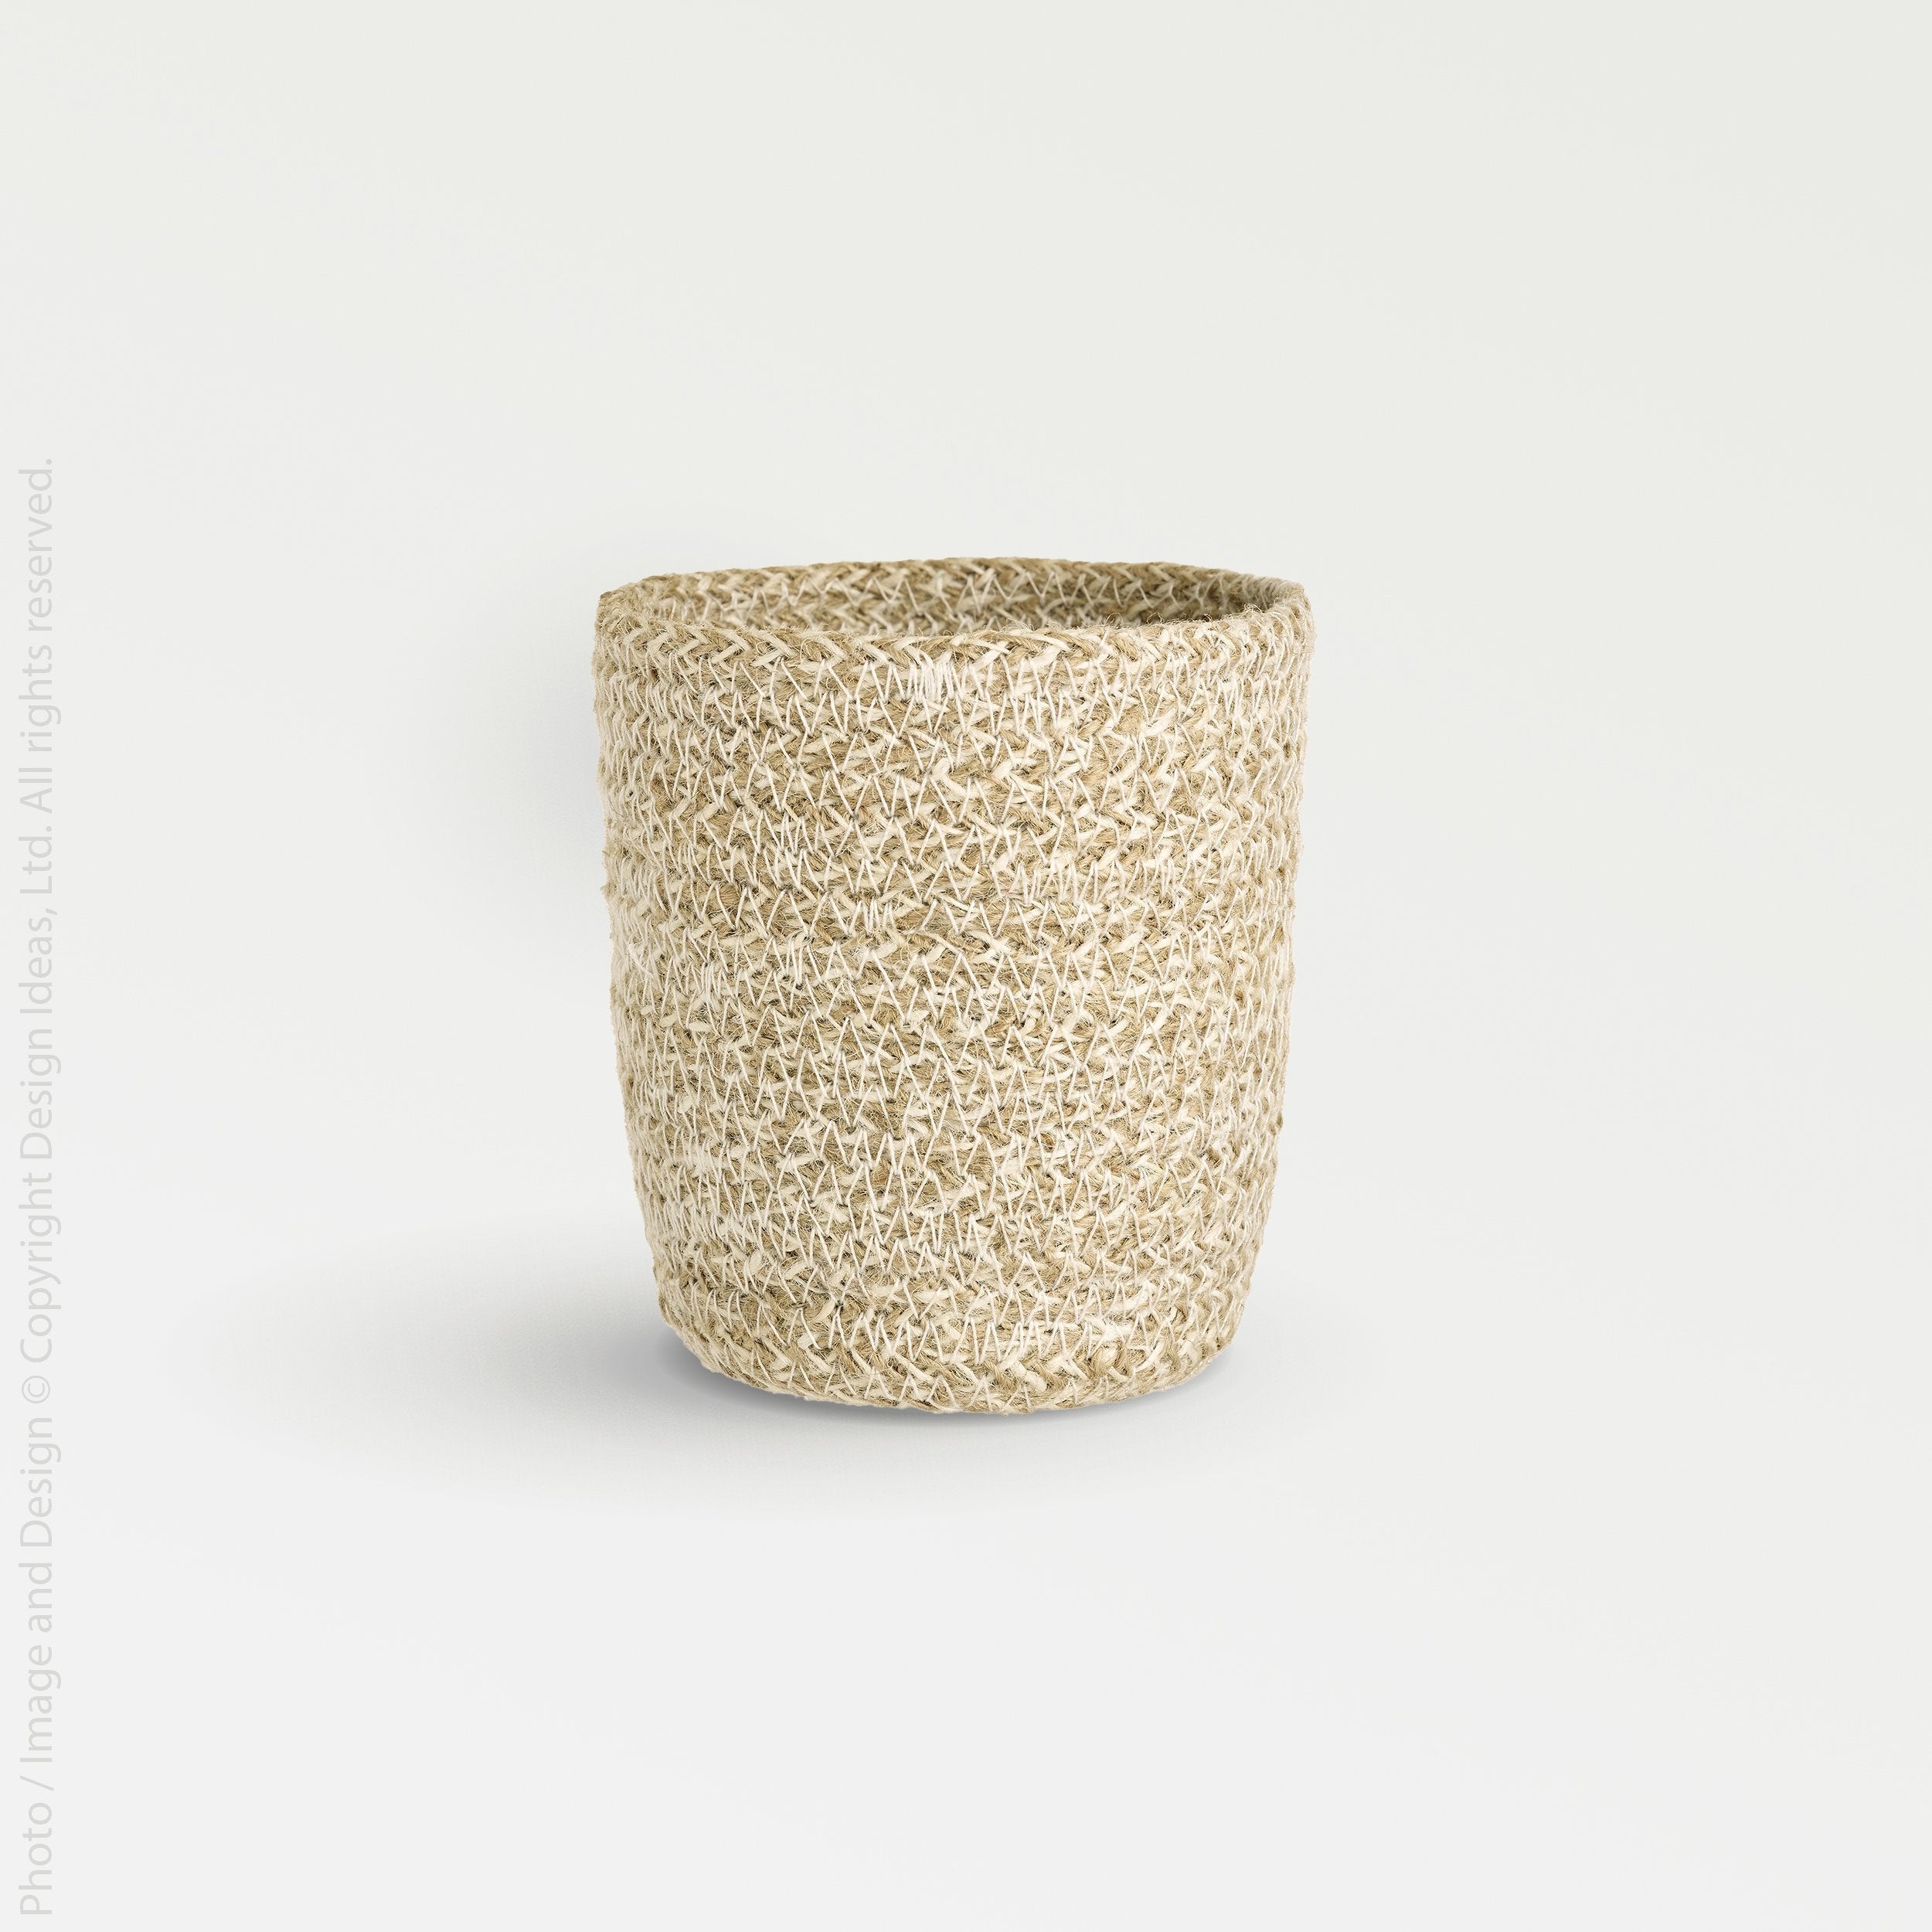 Melia™ pencil cup - Black | Image 1 | Premium Organizer from the Melia collection | made with Jute for long lasting use | texxture